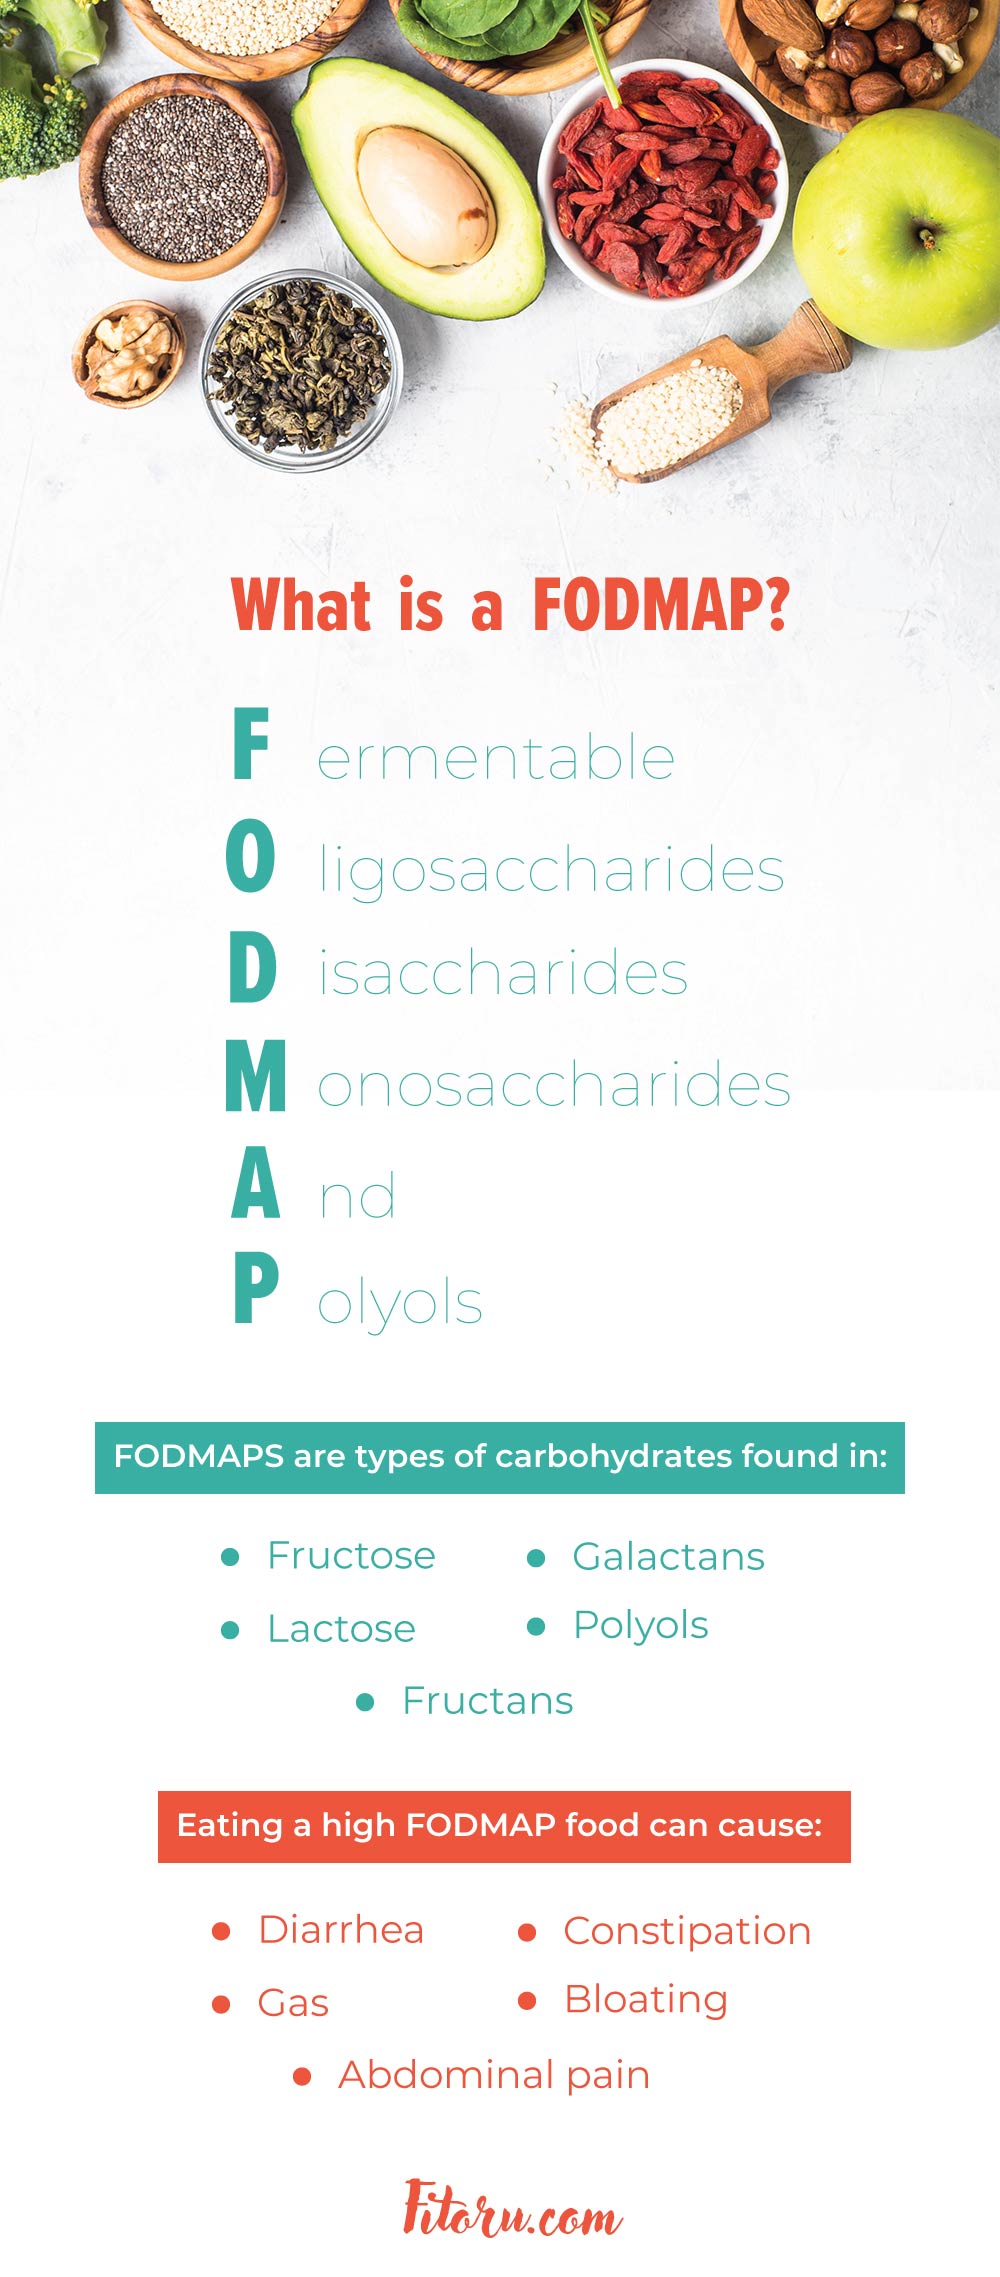 What Is a FODMAP?